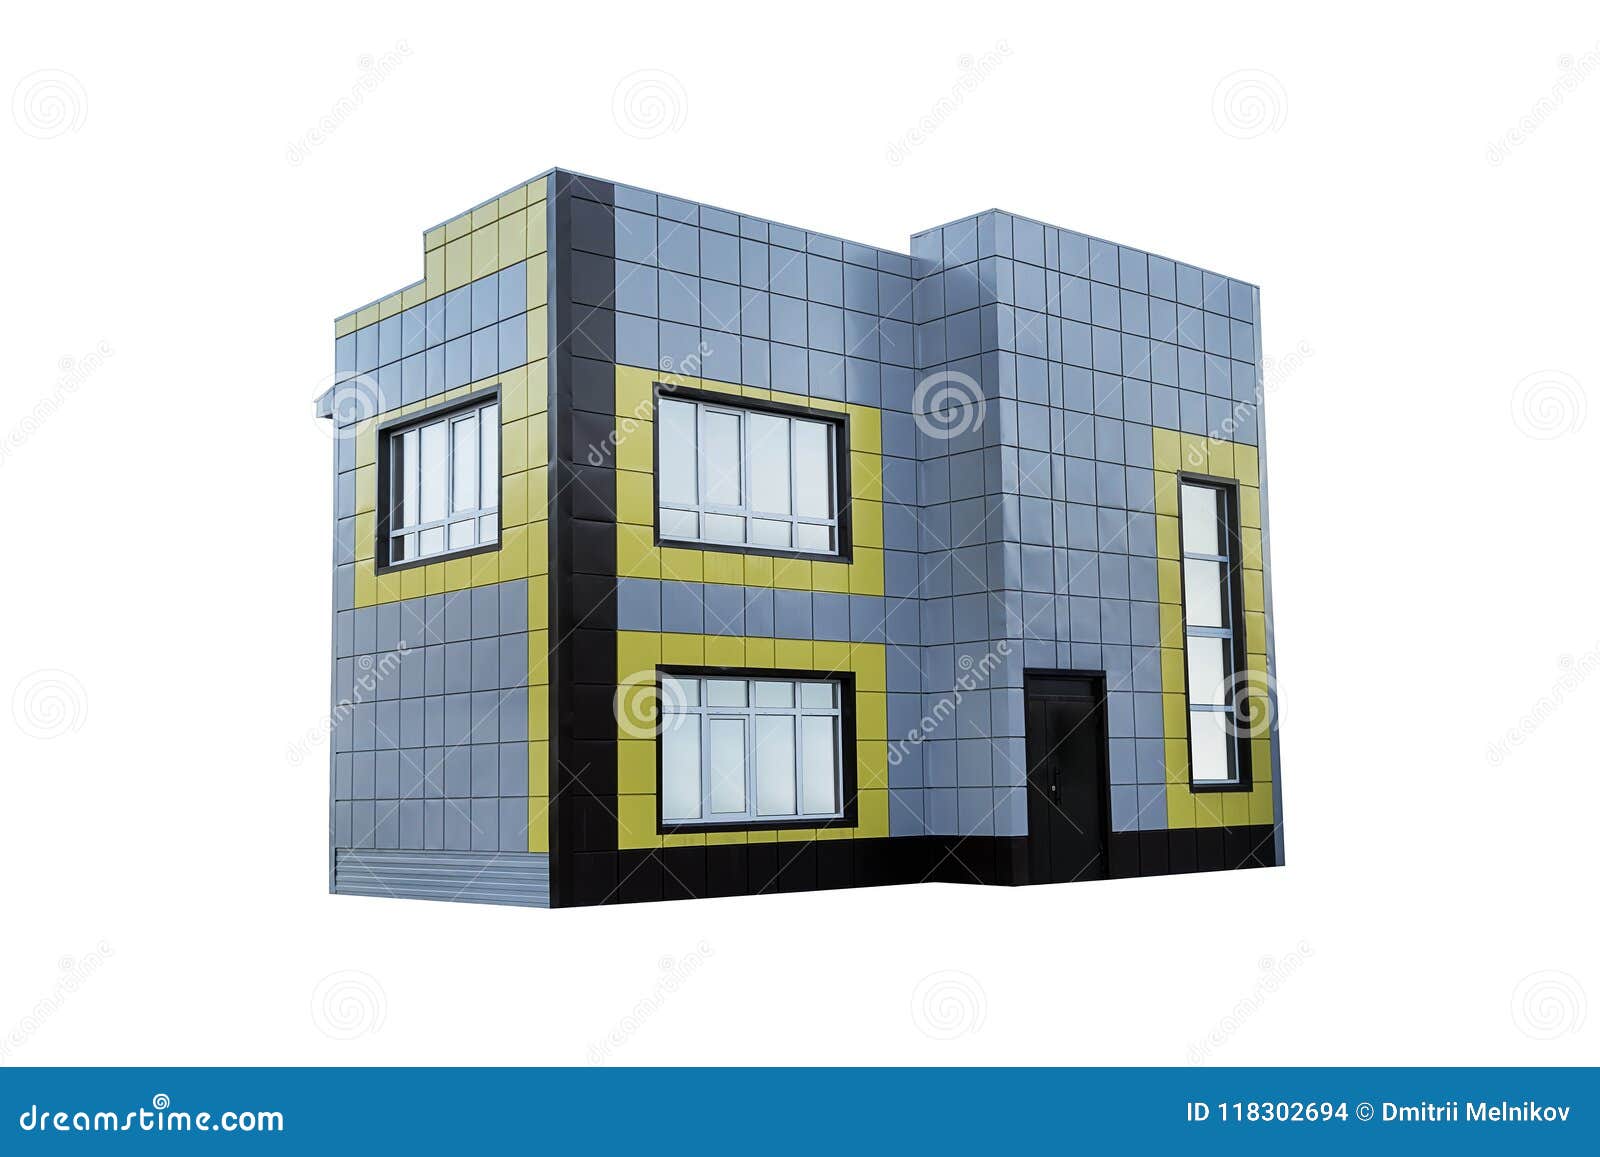 Empty Office Building On A Business Park Isolated On A White